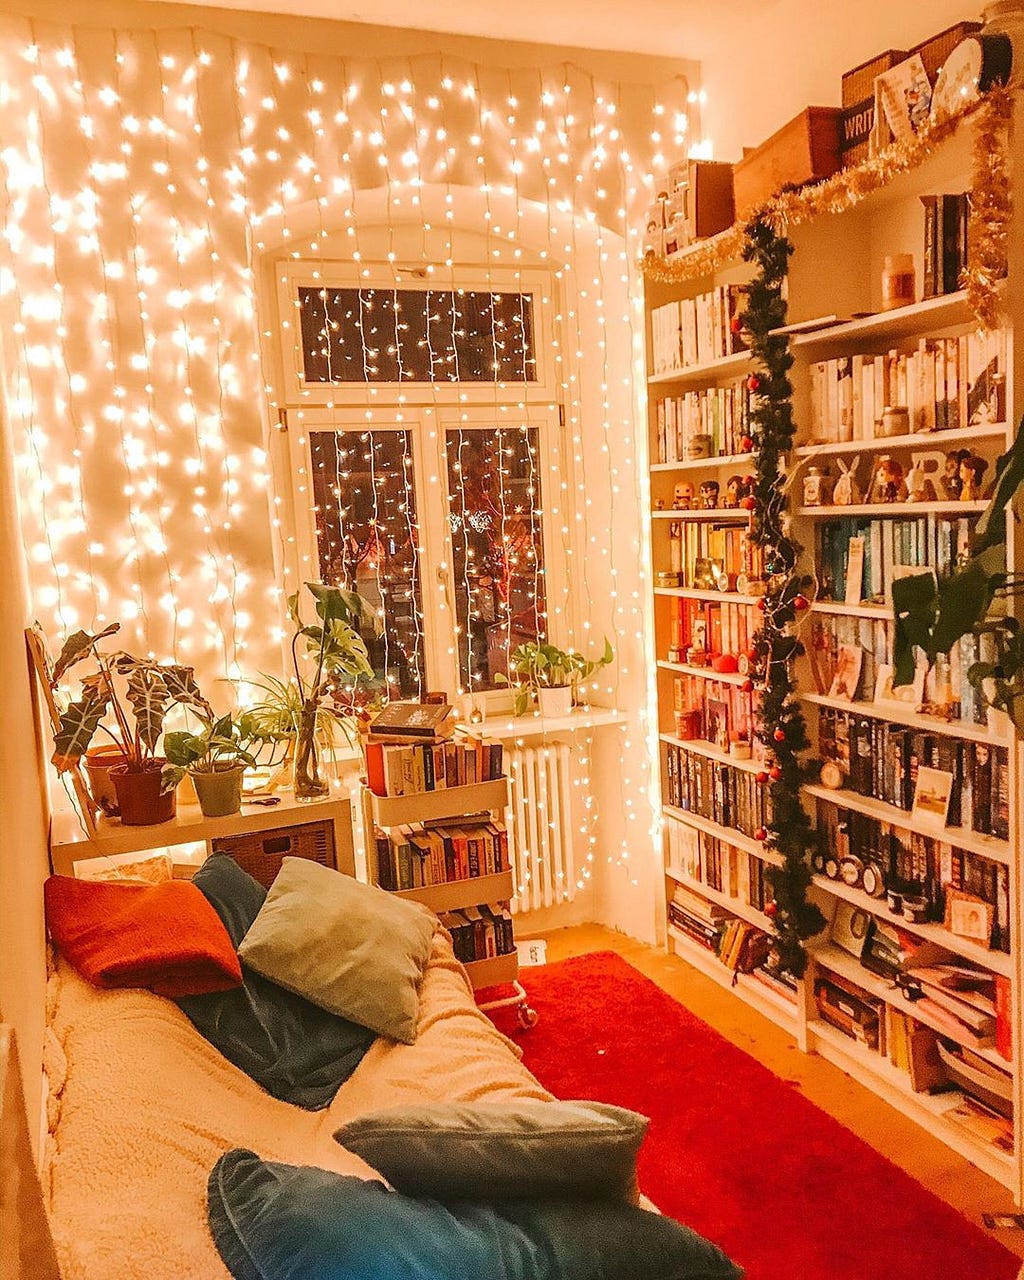 A reading room with a tall bookshelf full of books across from a comfy sofa with decorative pillows and fairy lights on the w